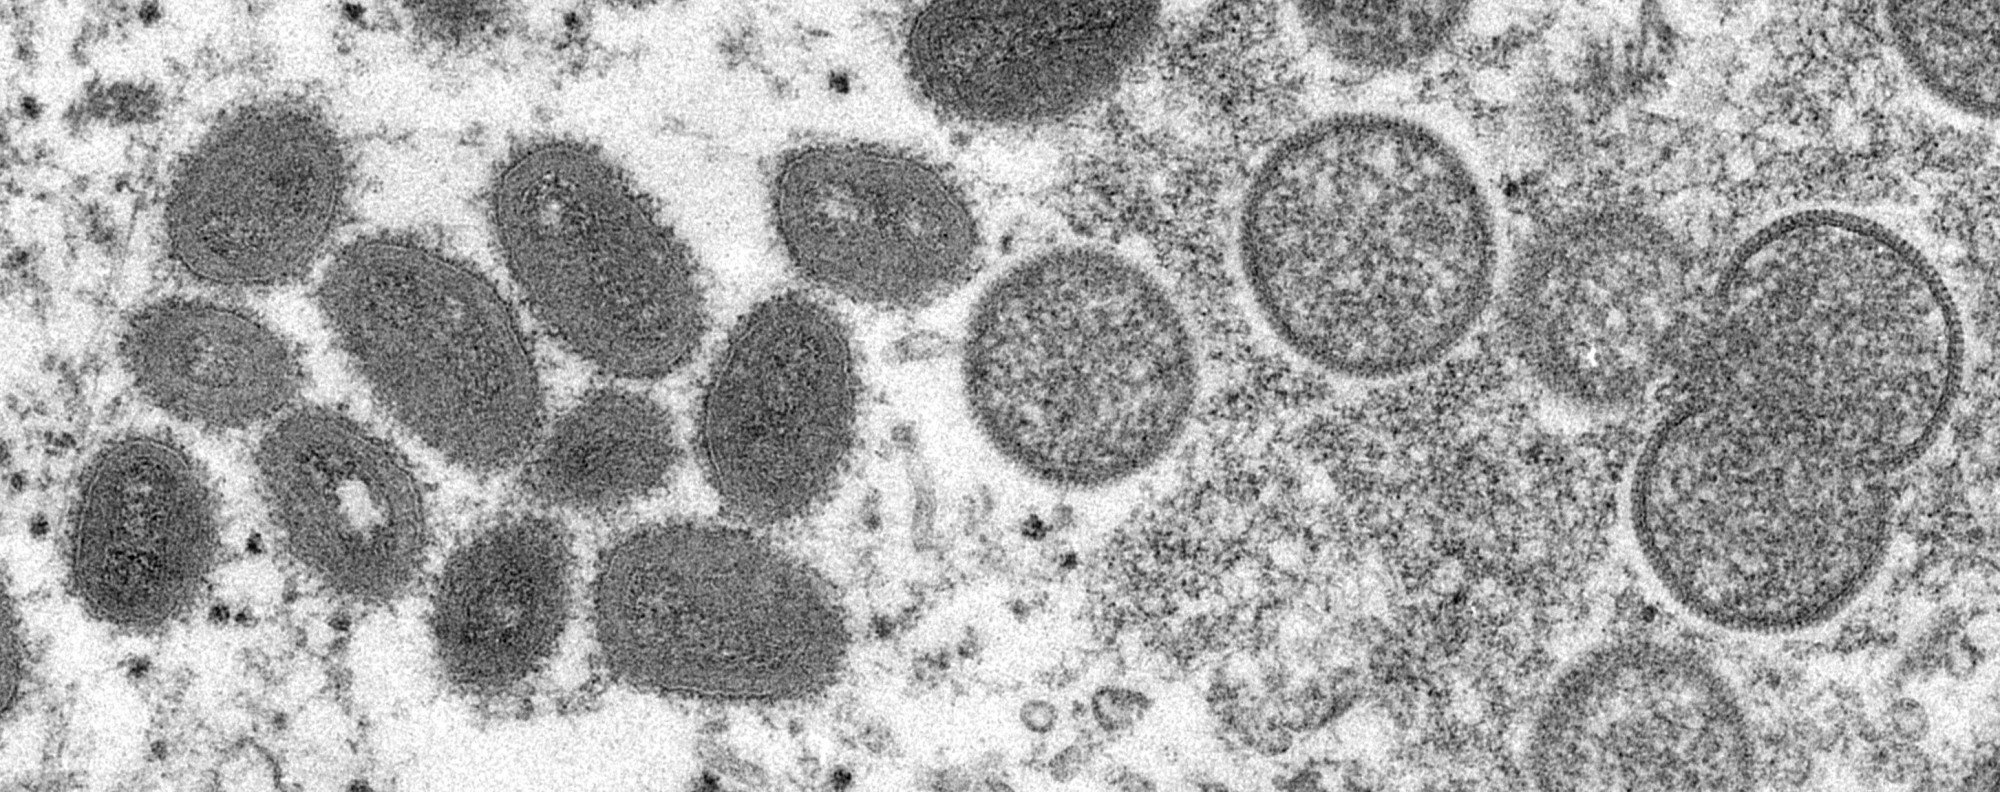 This undated electron microscopic (EM) handout image provided by the US Centers for Disease Control and Prevention depicts a monkeypox virion. Photo: Cynthia S. Goldsmith / Centers for Disease Control and Prevention via AFP